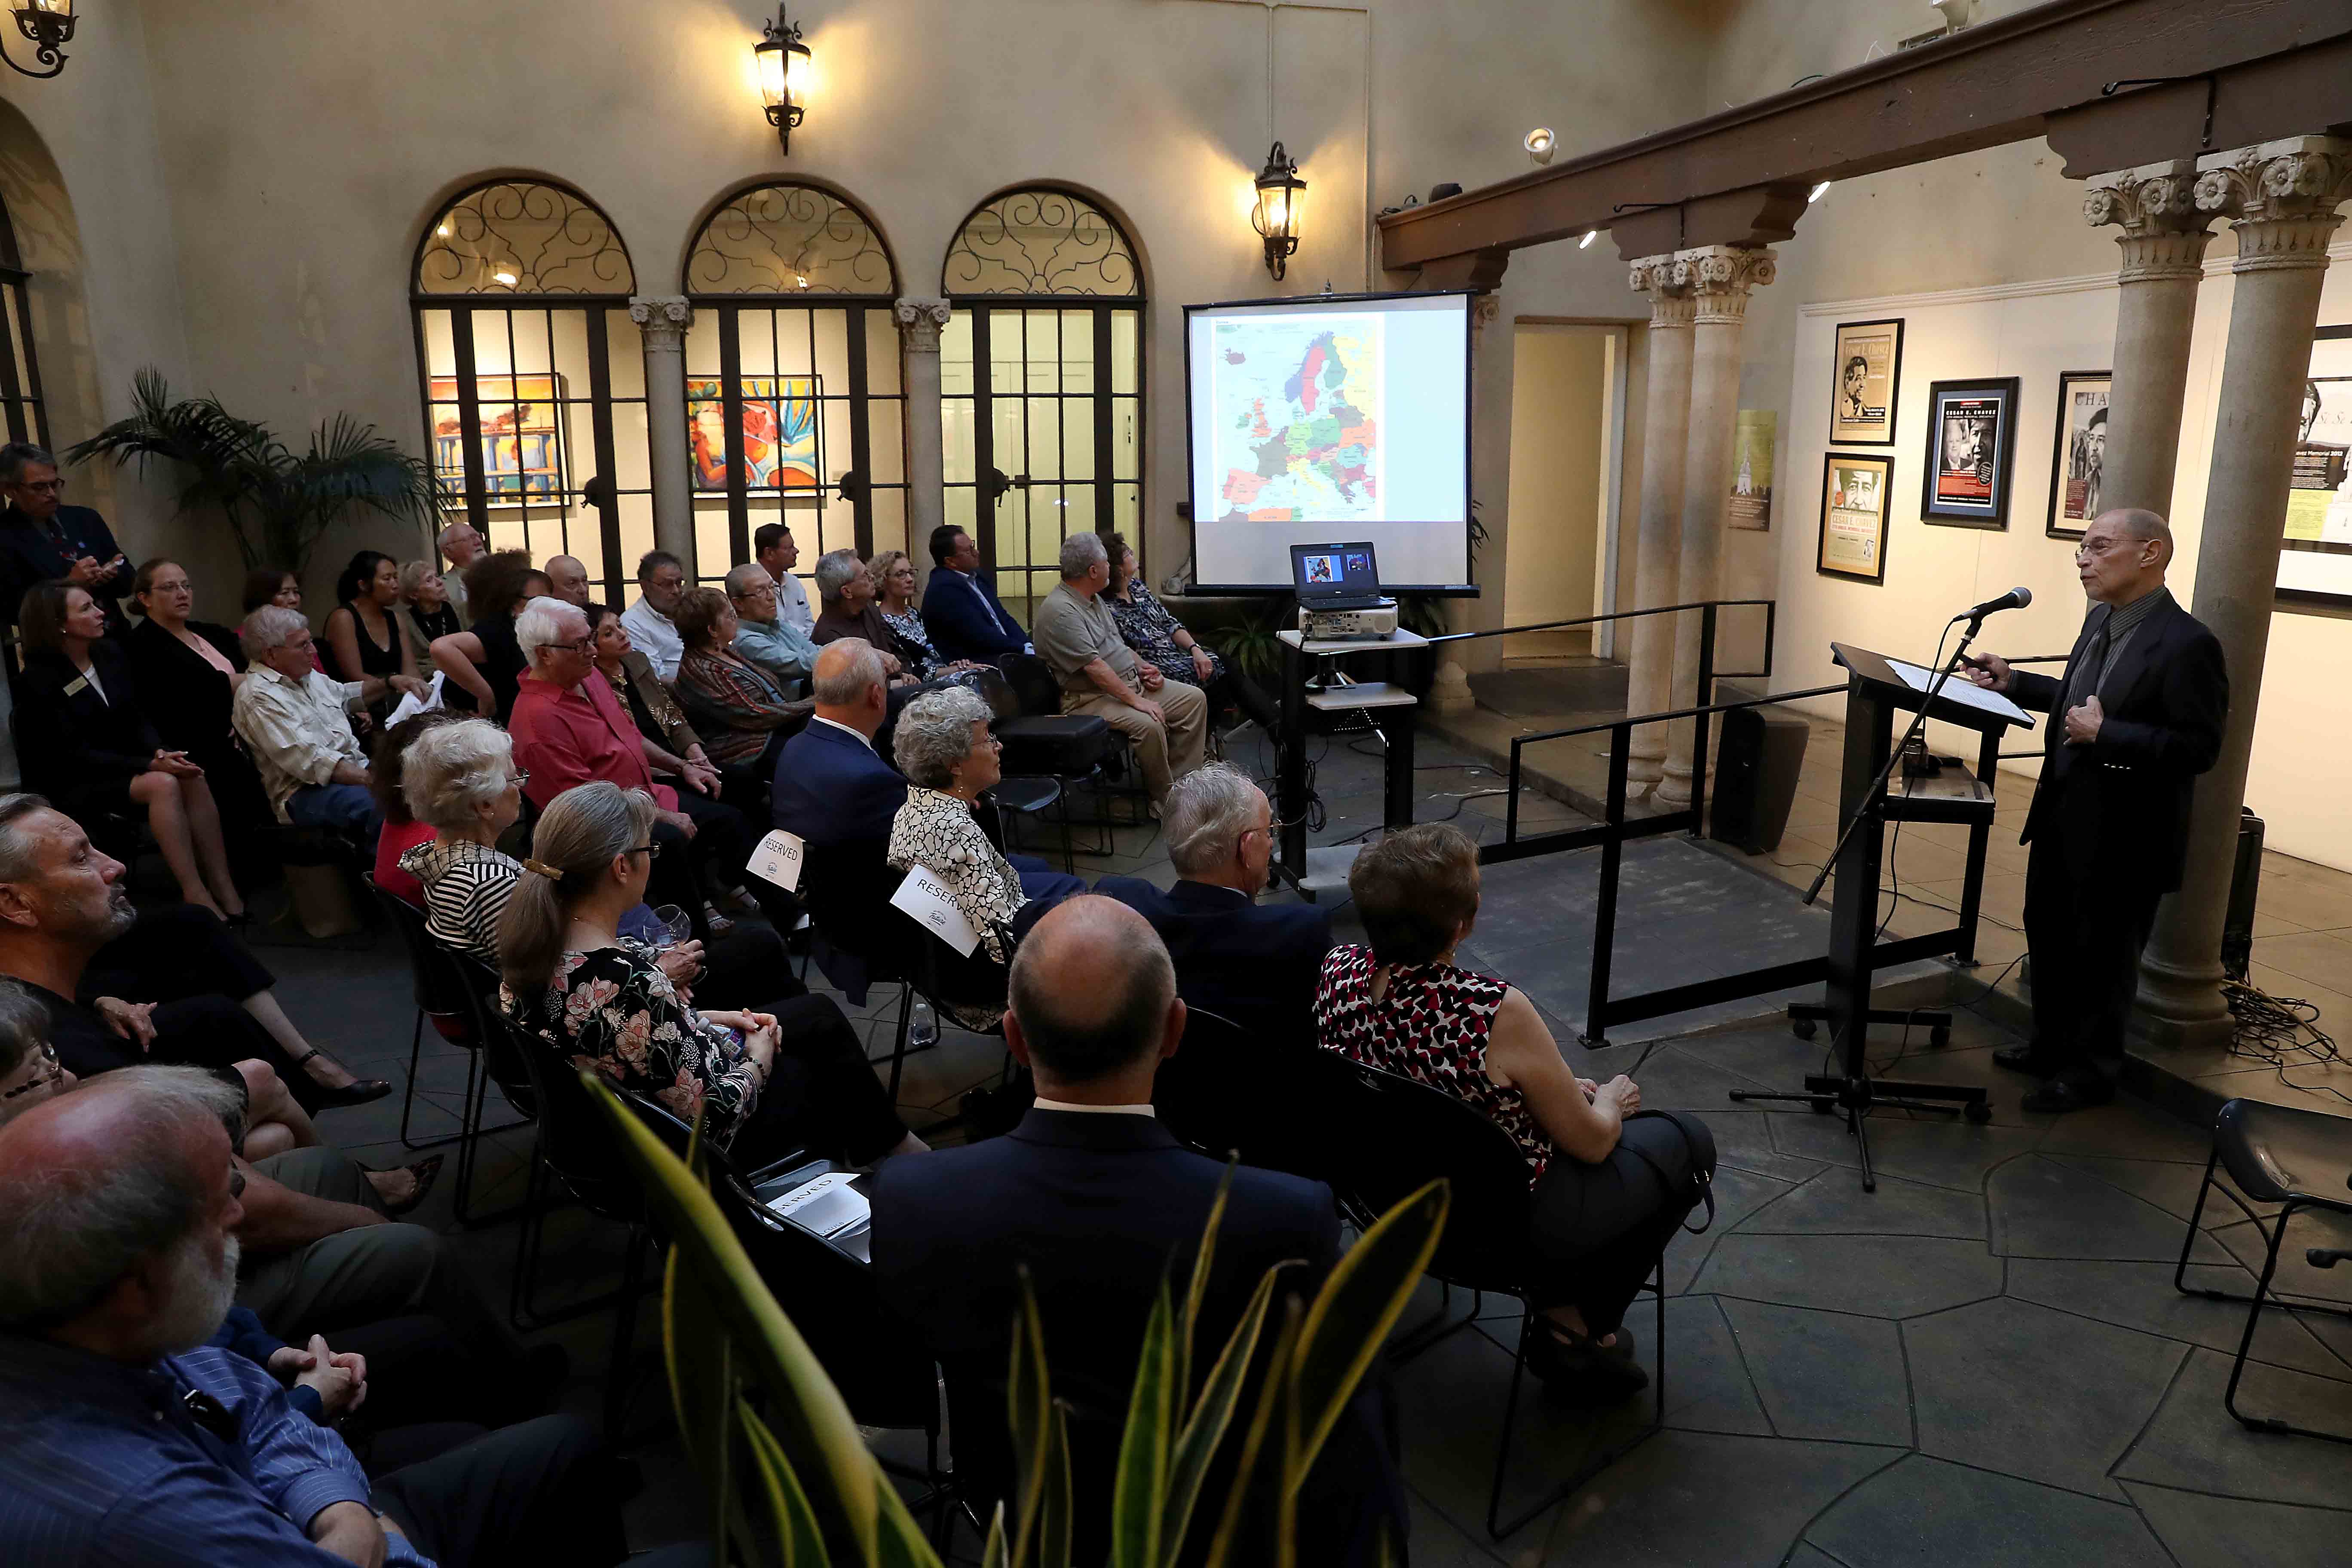 “Remnants of Jewish Life in Post-Holocaust Europe: A Personal Journey,” was given twice, May 13 at Cal State San Bernardino’s Palm Desert Campus in Palm Desert, and May 14 at the Riverside Art Musuem in Riverside.